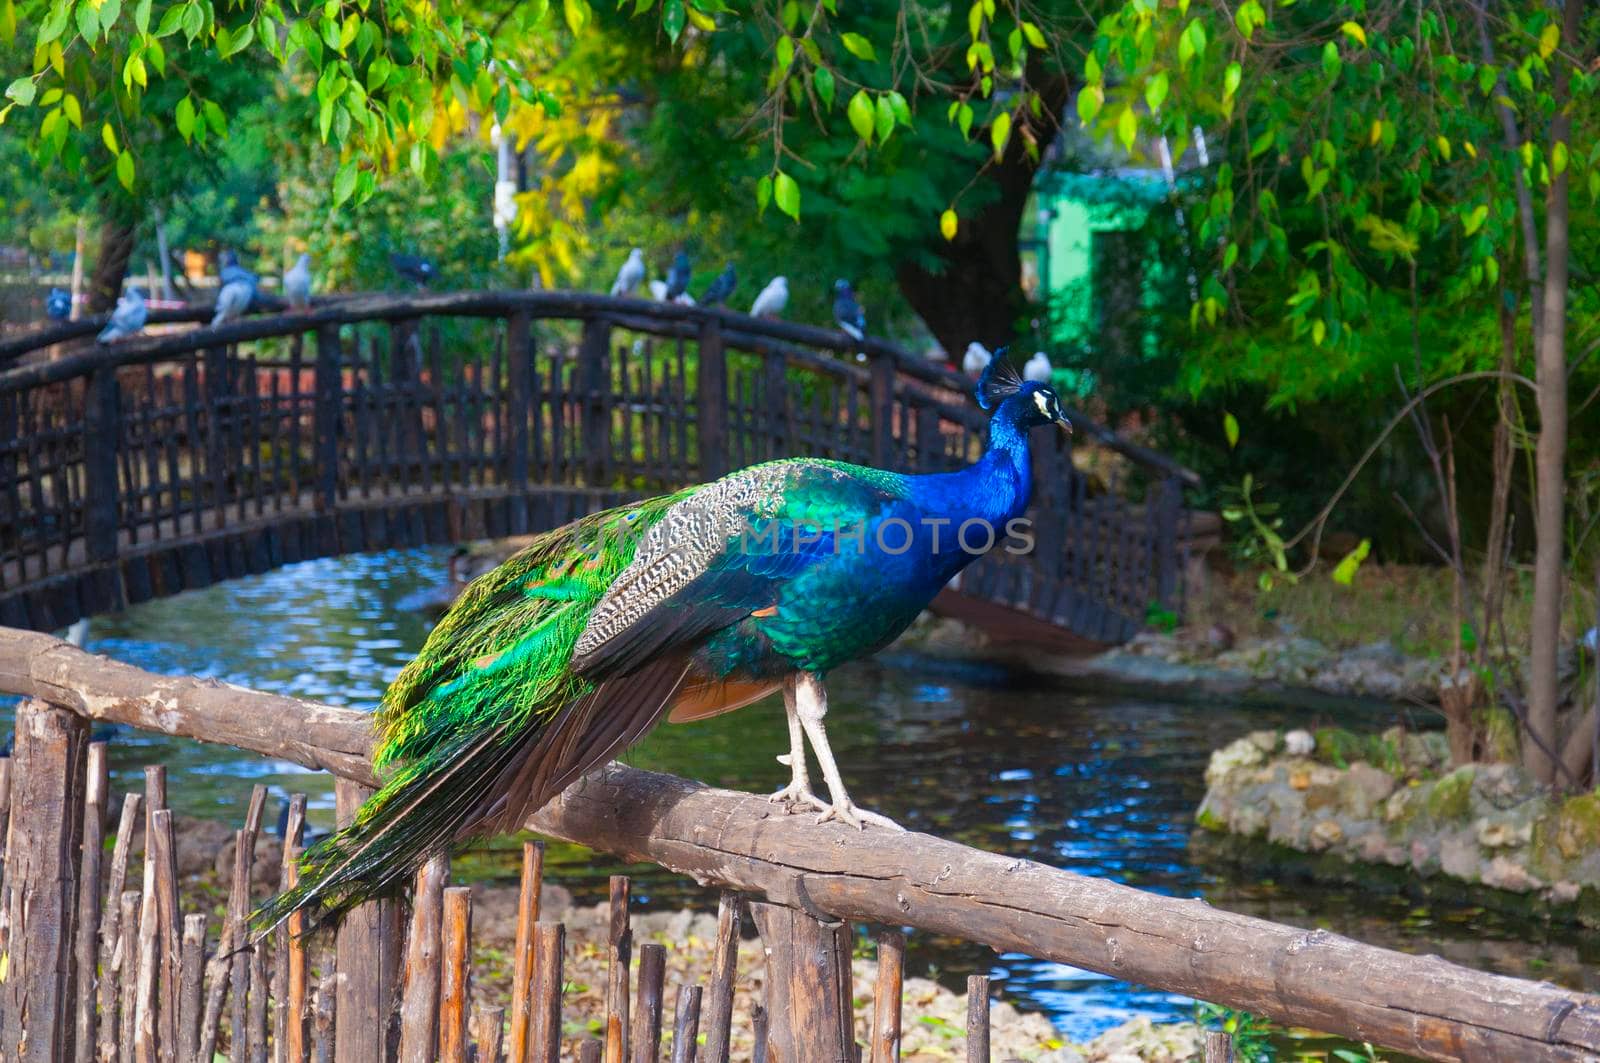 Peacock sitting on the fence with the river background, autumn